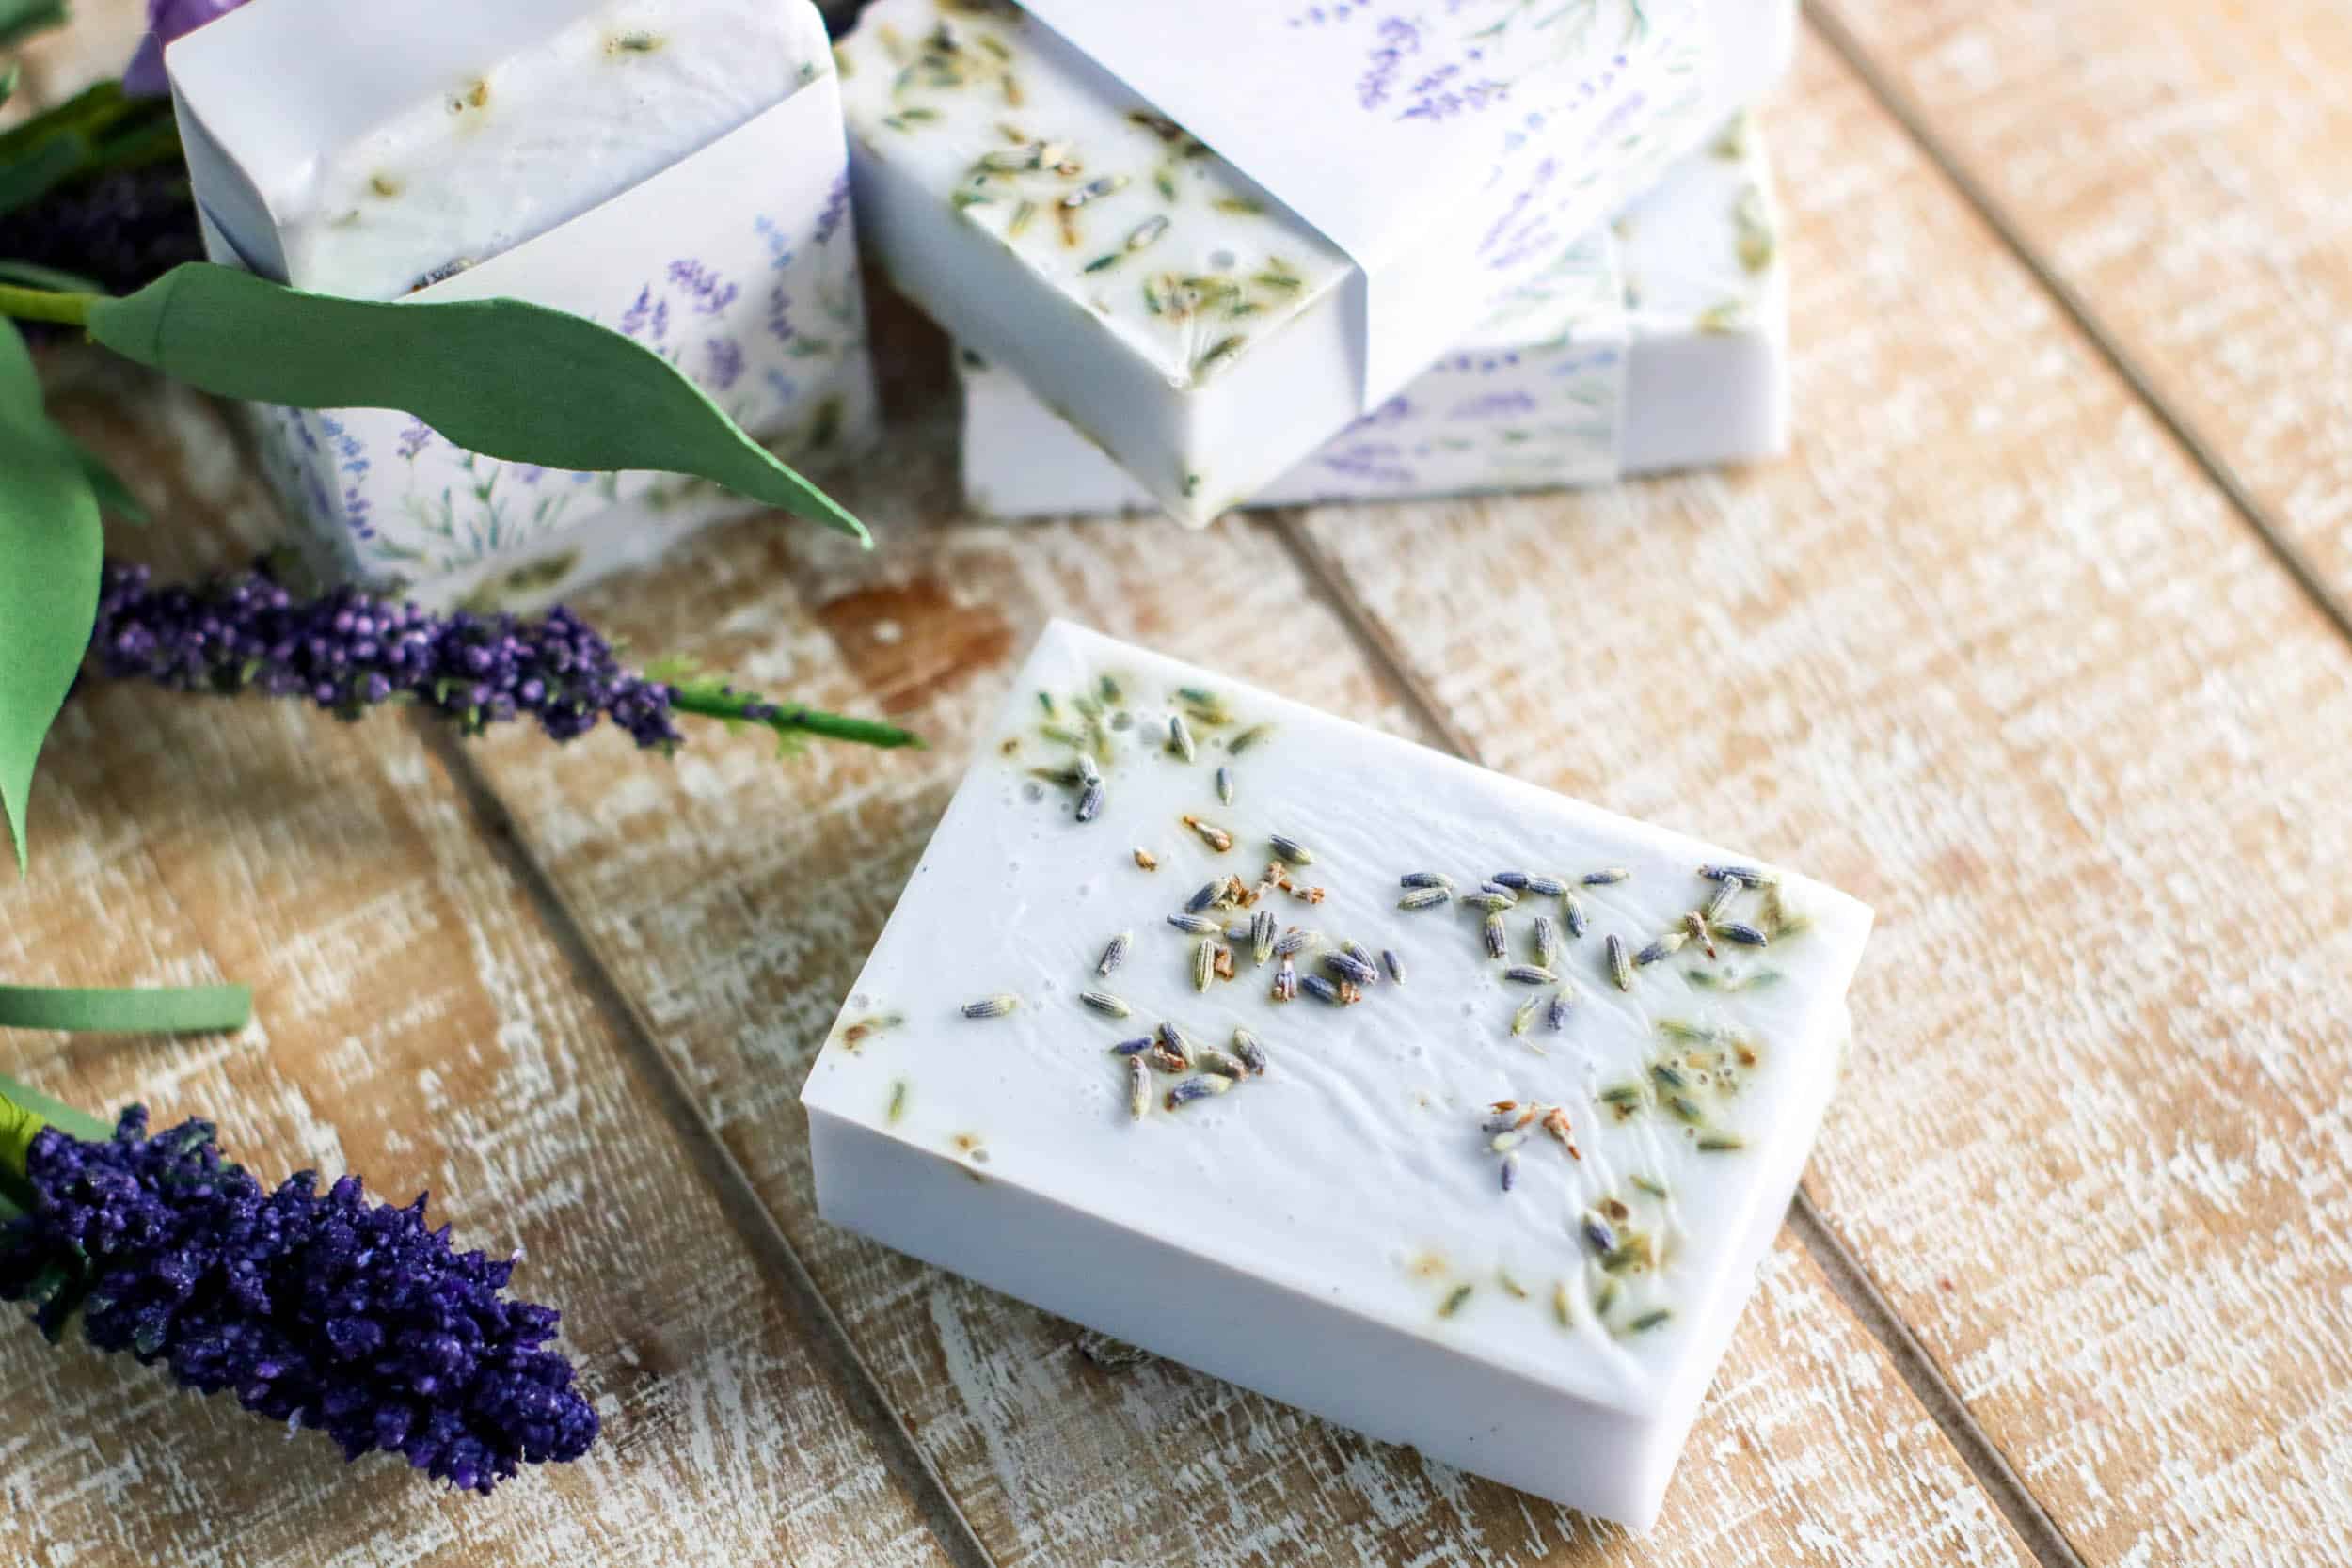 Lavender soap bars next to lavender flowers and green leaves.